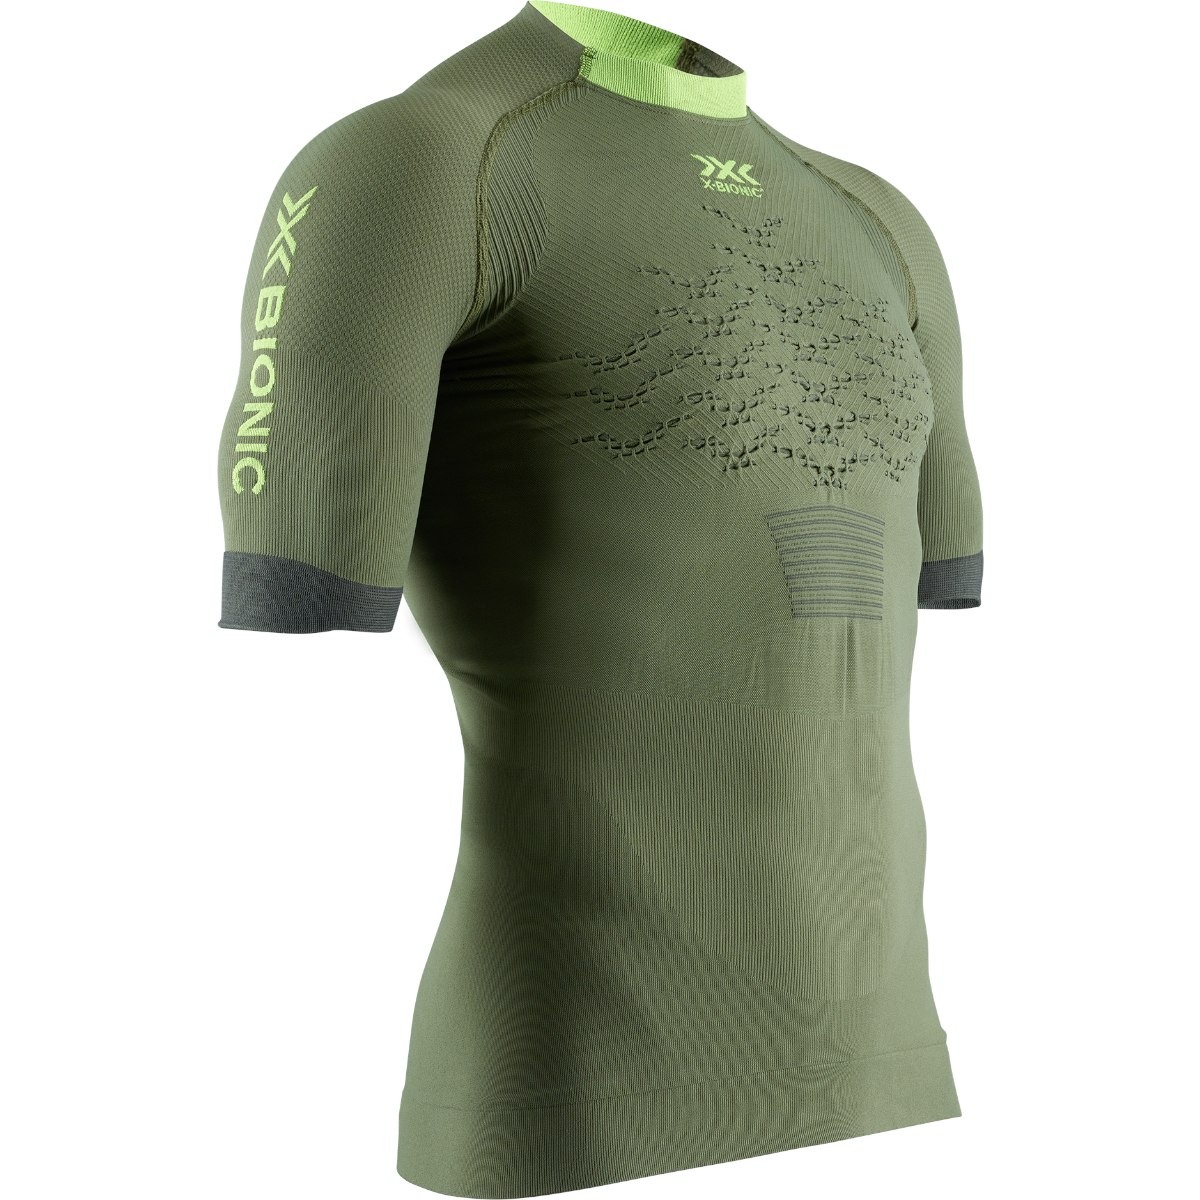 Image of X-Bionic The Trick 4.0 Run Shirt Short Sleeves for Men - olive green/phyton yellow